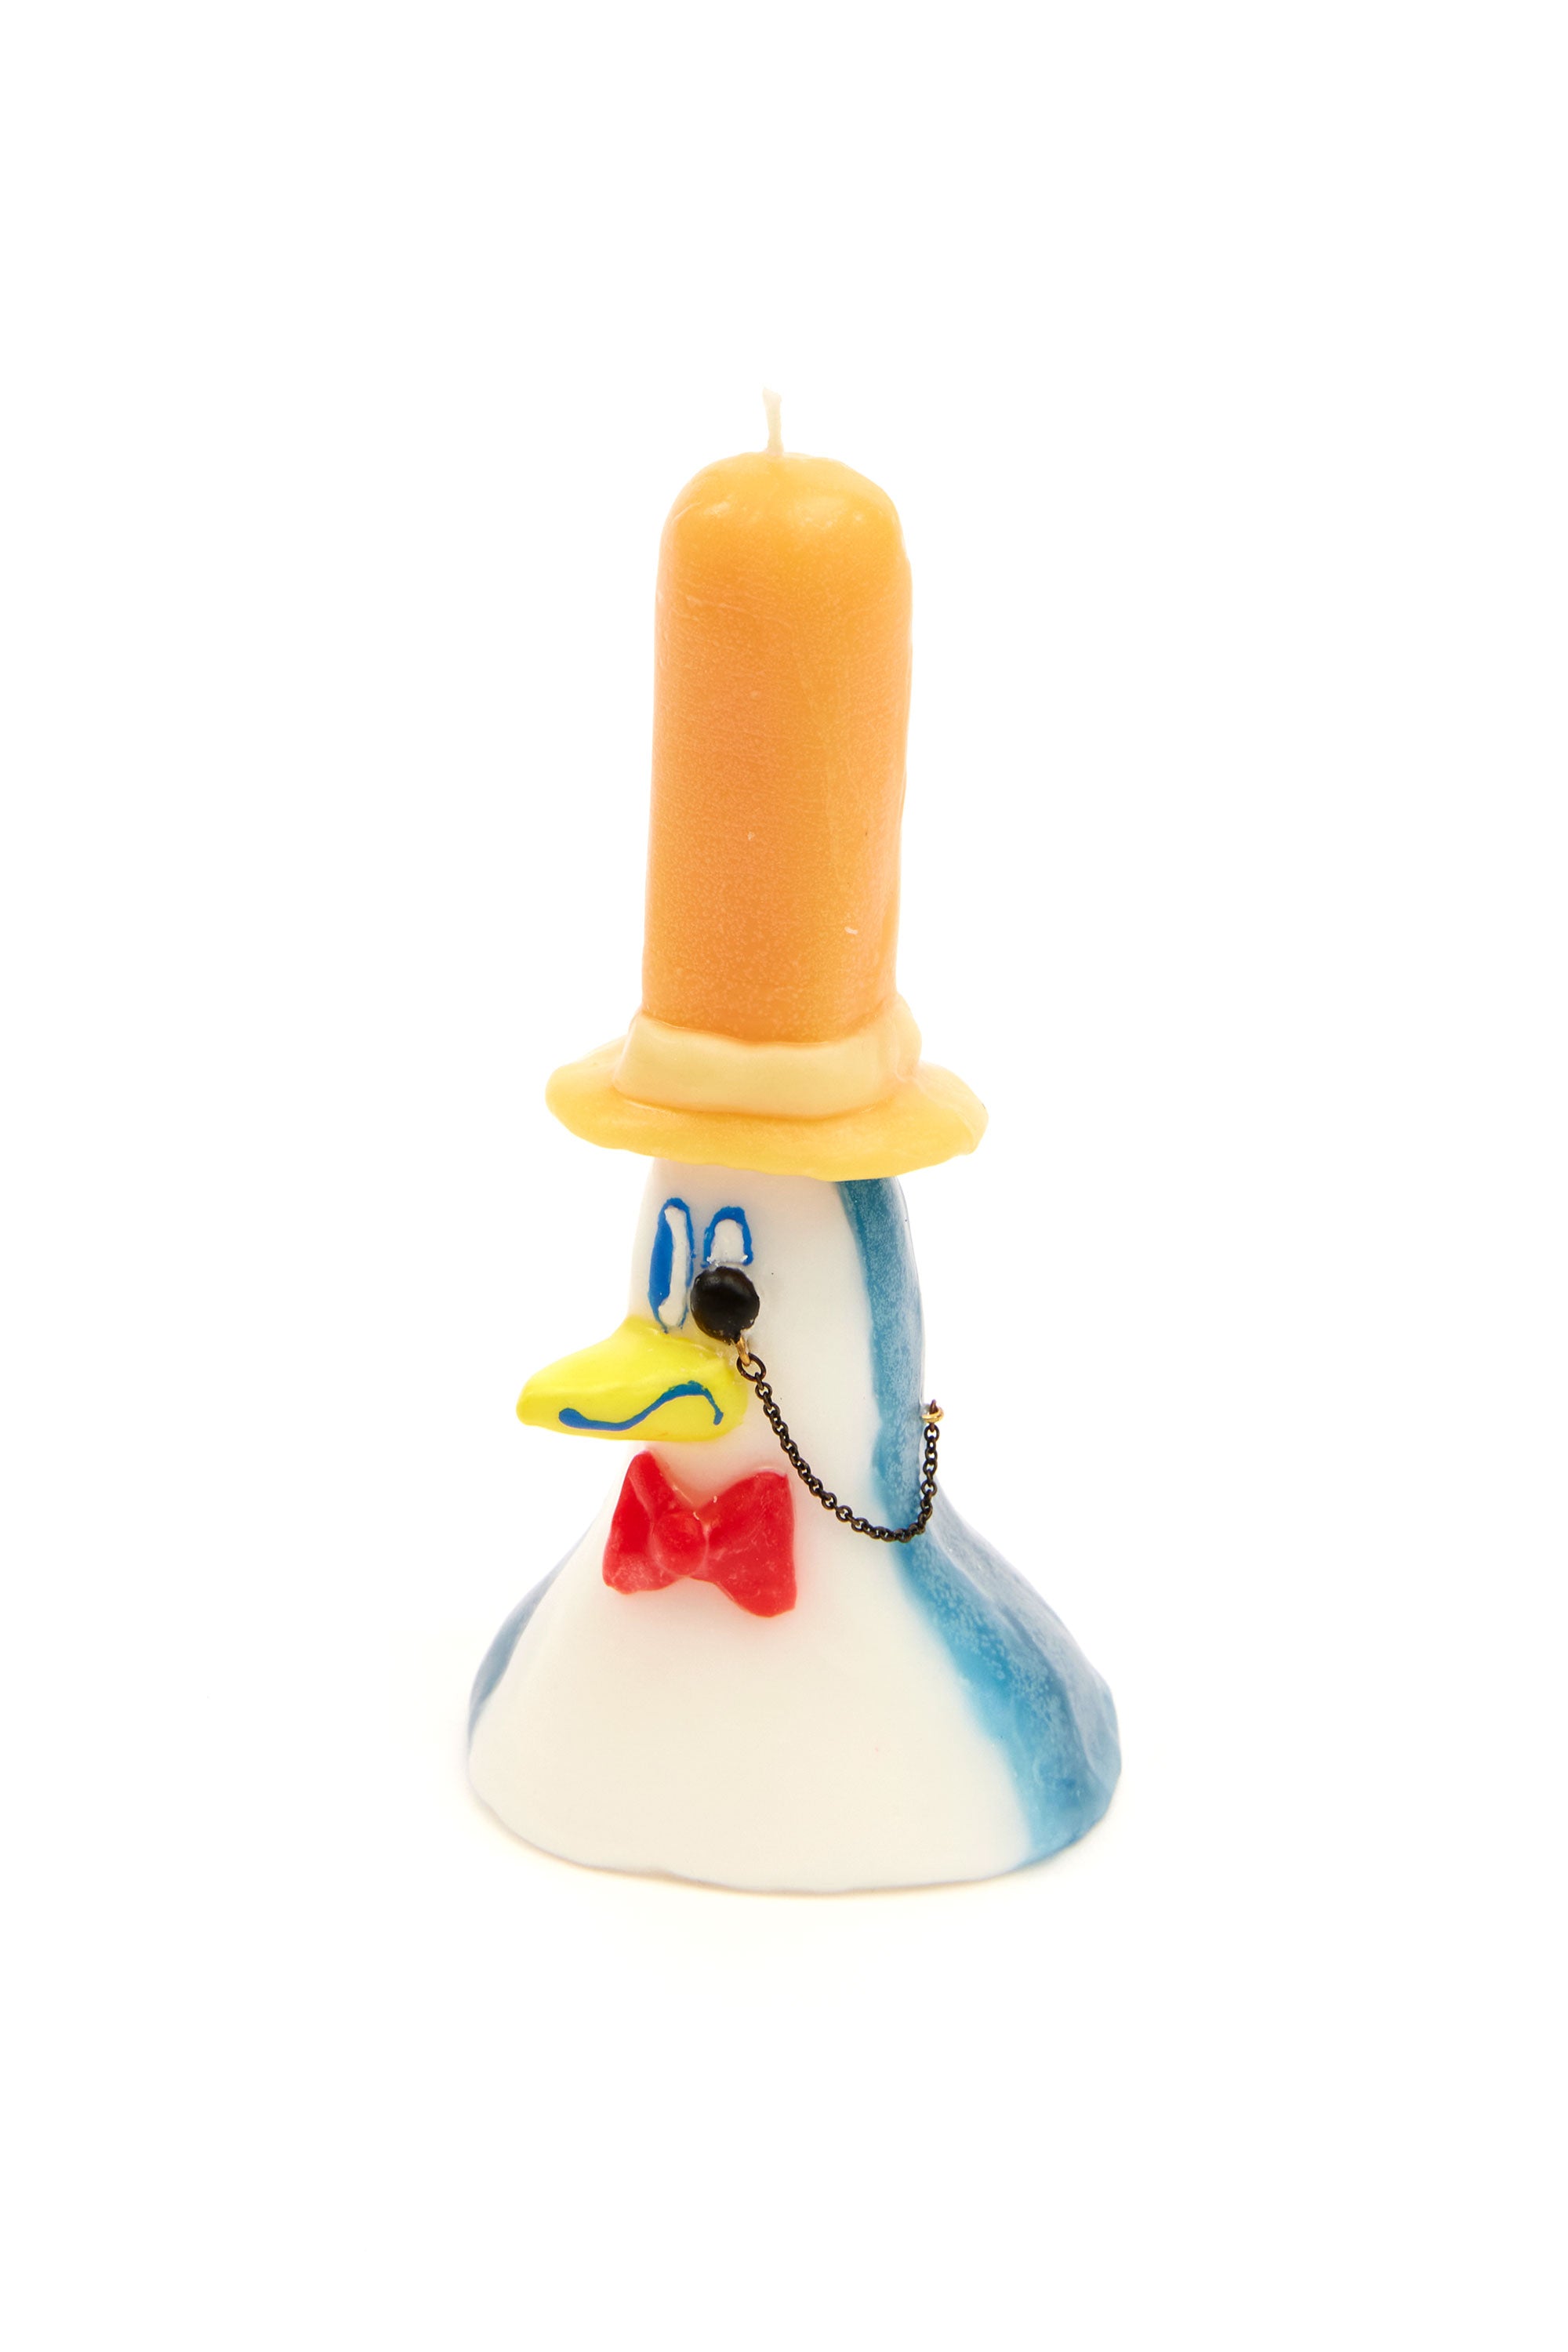 The OLGA GOOSE - FRANK WAX CANDLE  available online with global shipping, and in PAM Stores Melbourne and Sydney.